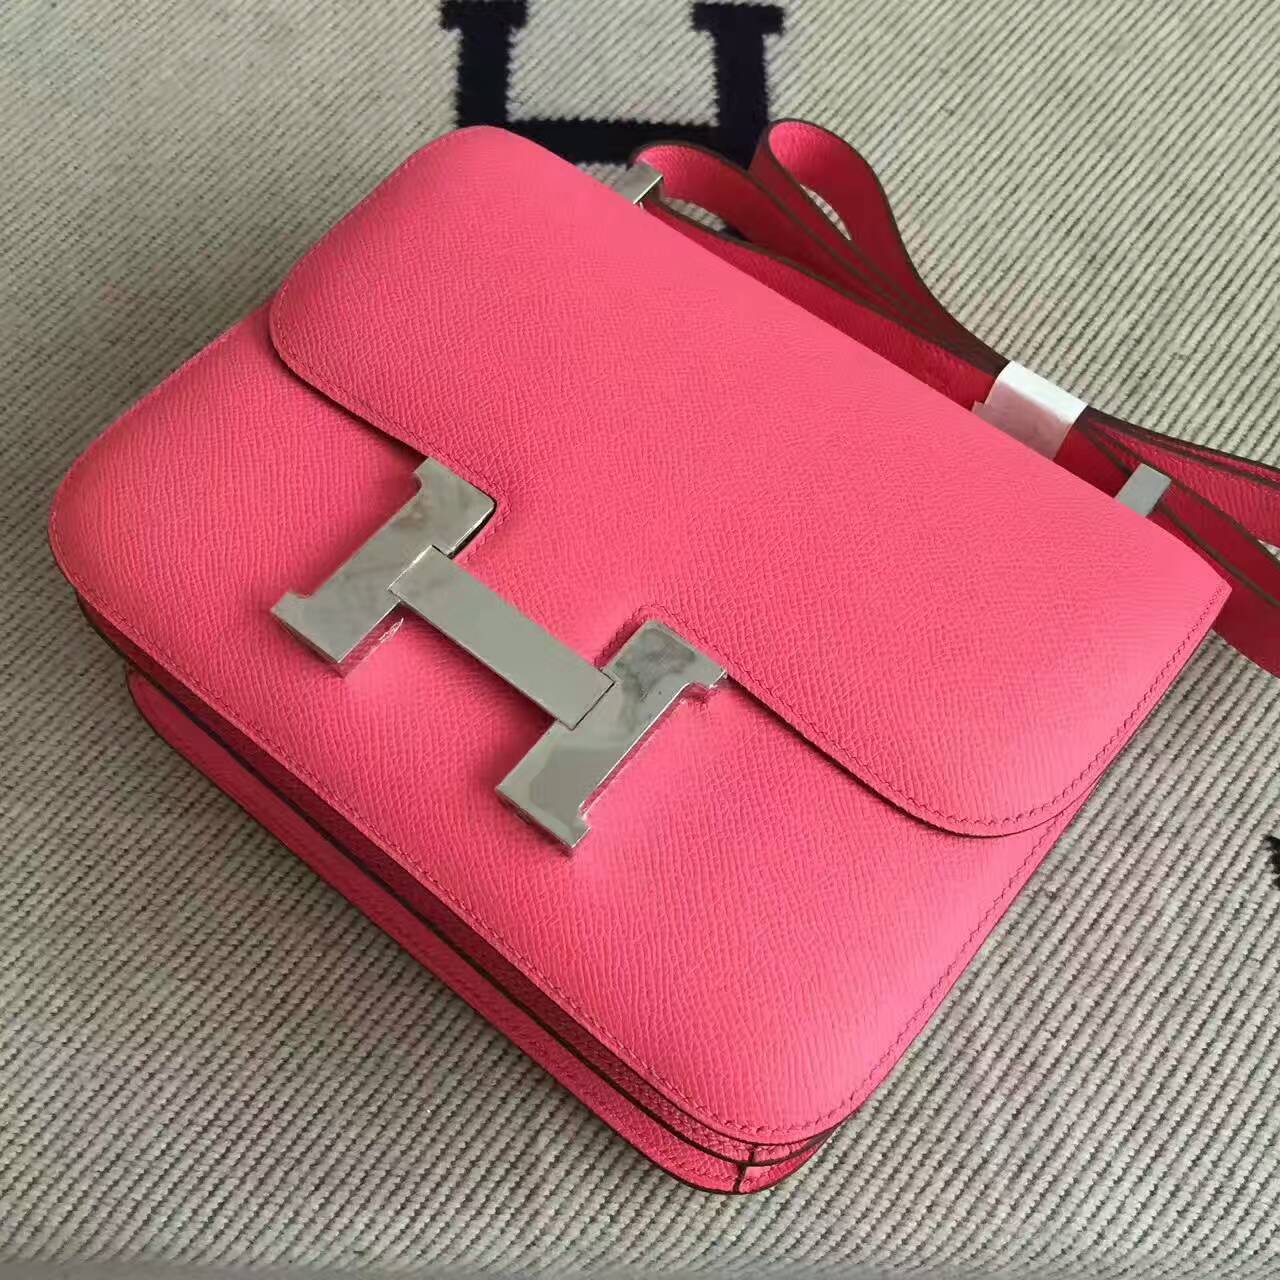 Hand Stitching Hermes Epsom Calfskin Leather Constance 24cm in 8W Rose Lipstick